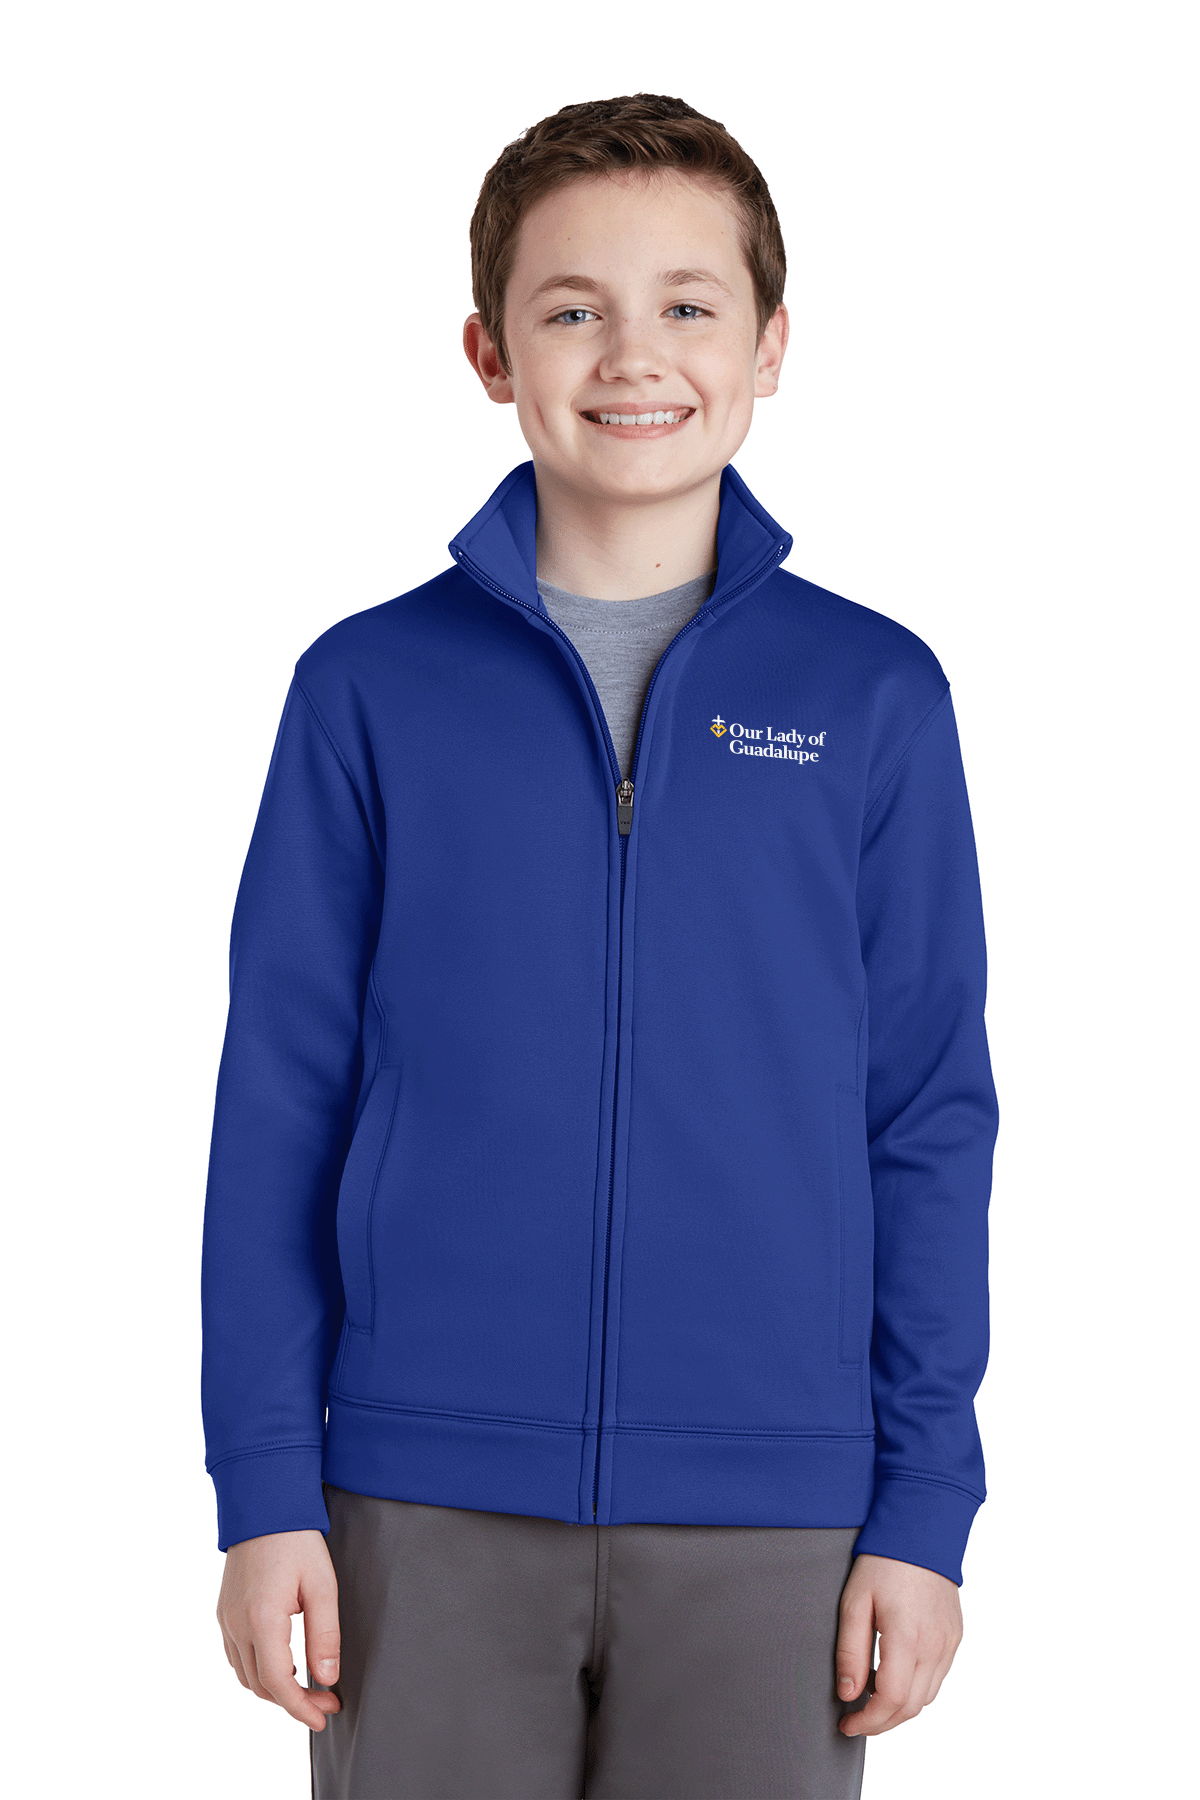 YST241 - OUR LADY OF GUADALUPE - Youth Sport Tek Full Zip Jacket